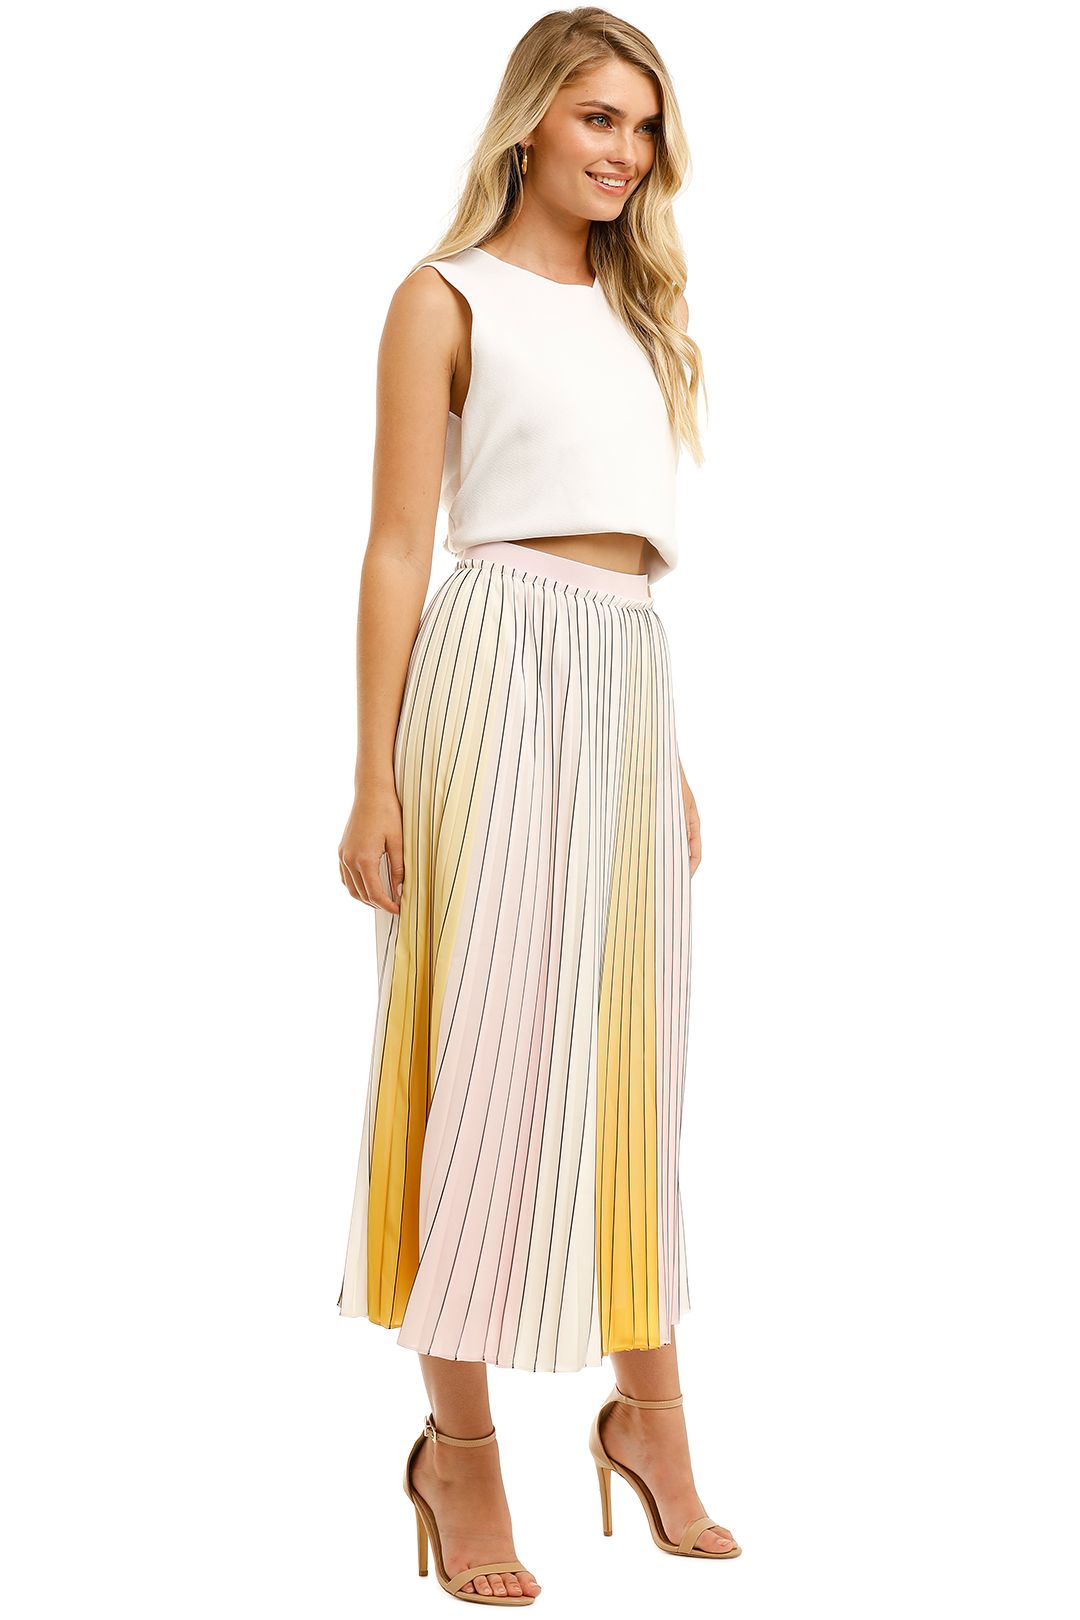 Ted-Baker-Noviia-Pleated-Ombre-Skirt-Yellow-Side